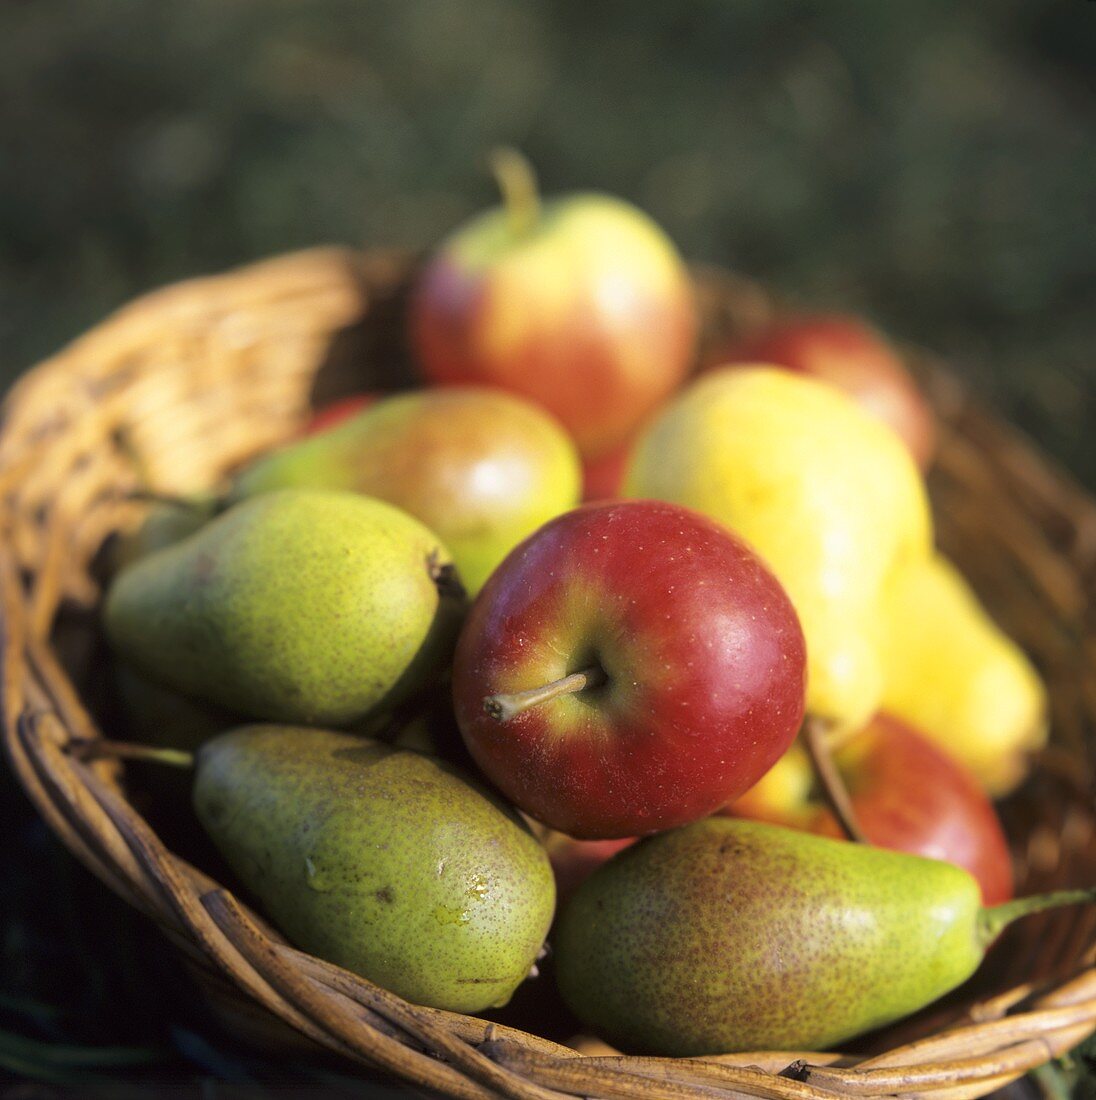 Apples and pears in a basket in the open air